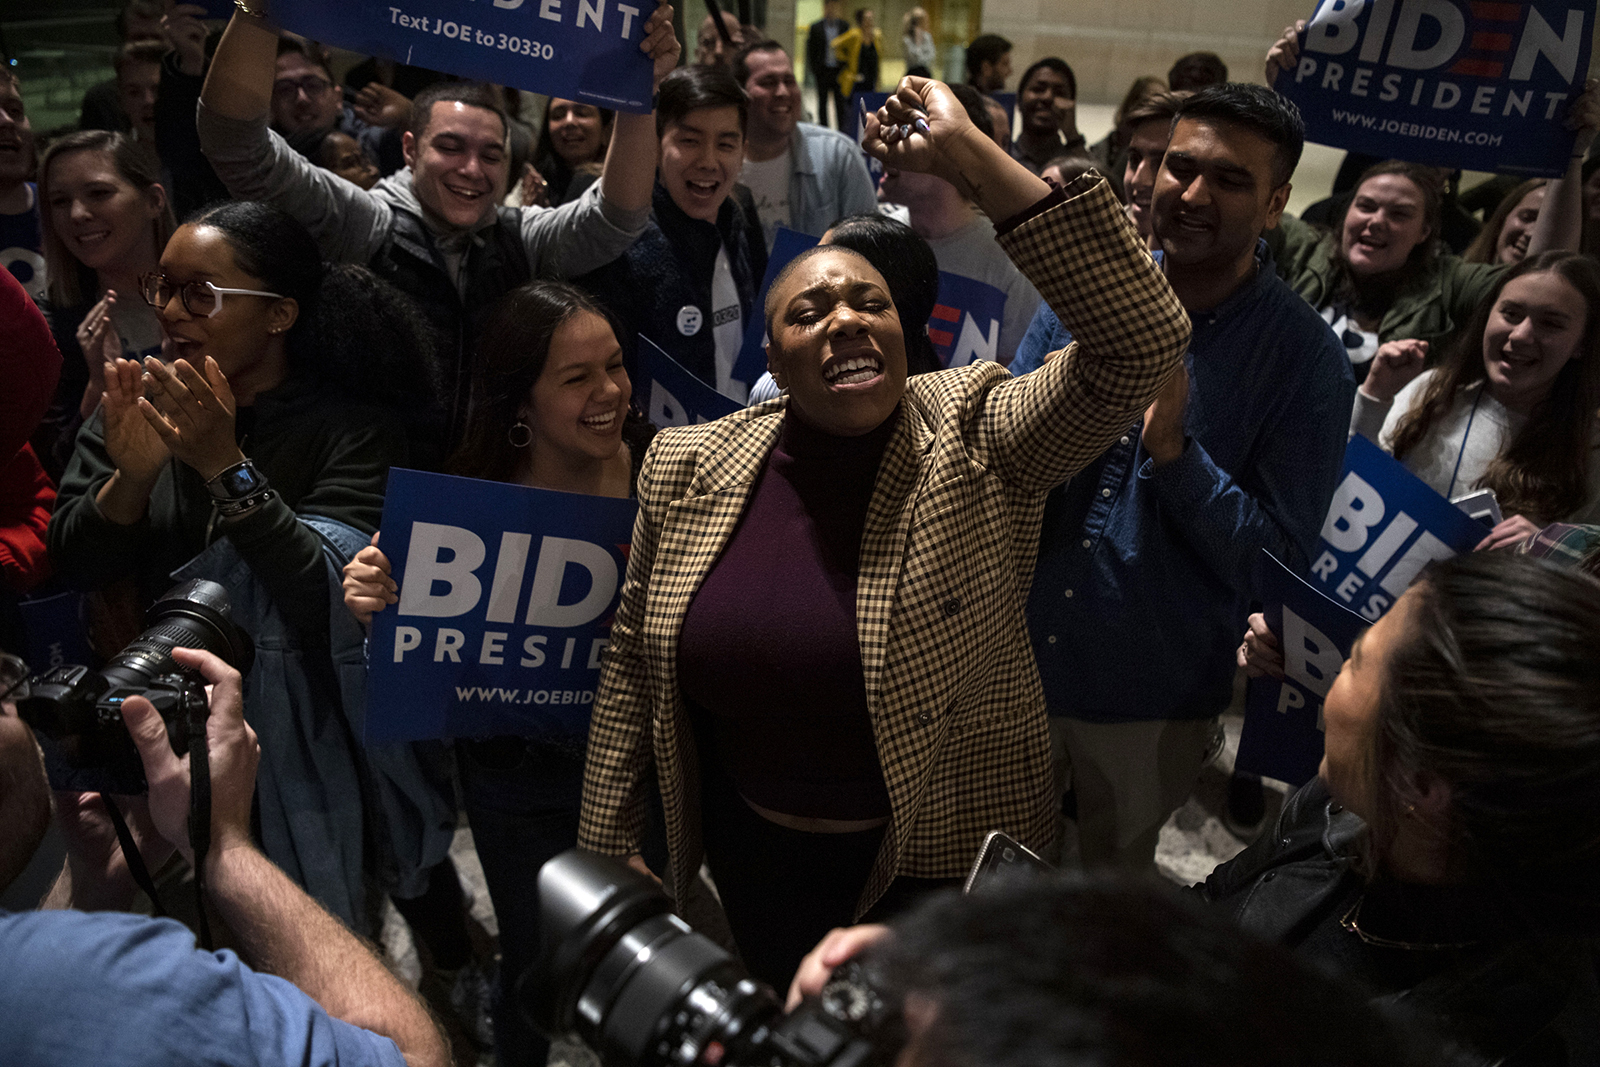 In this March 10, 2020 file photo, Symone Sanders, senior campaign advisor, dances and sings after former Vice President Joe Biden spoke about his victories and party unity at the National Constitution Center in Philadelphia.